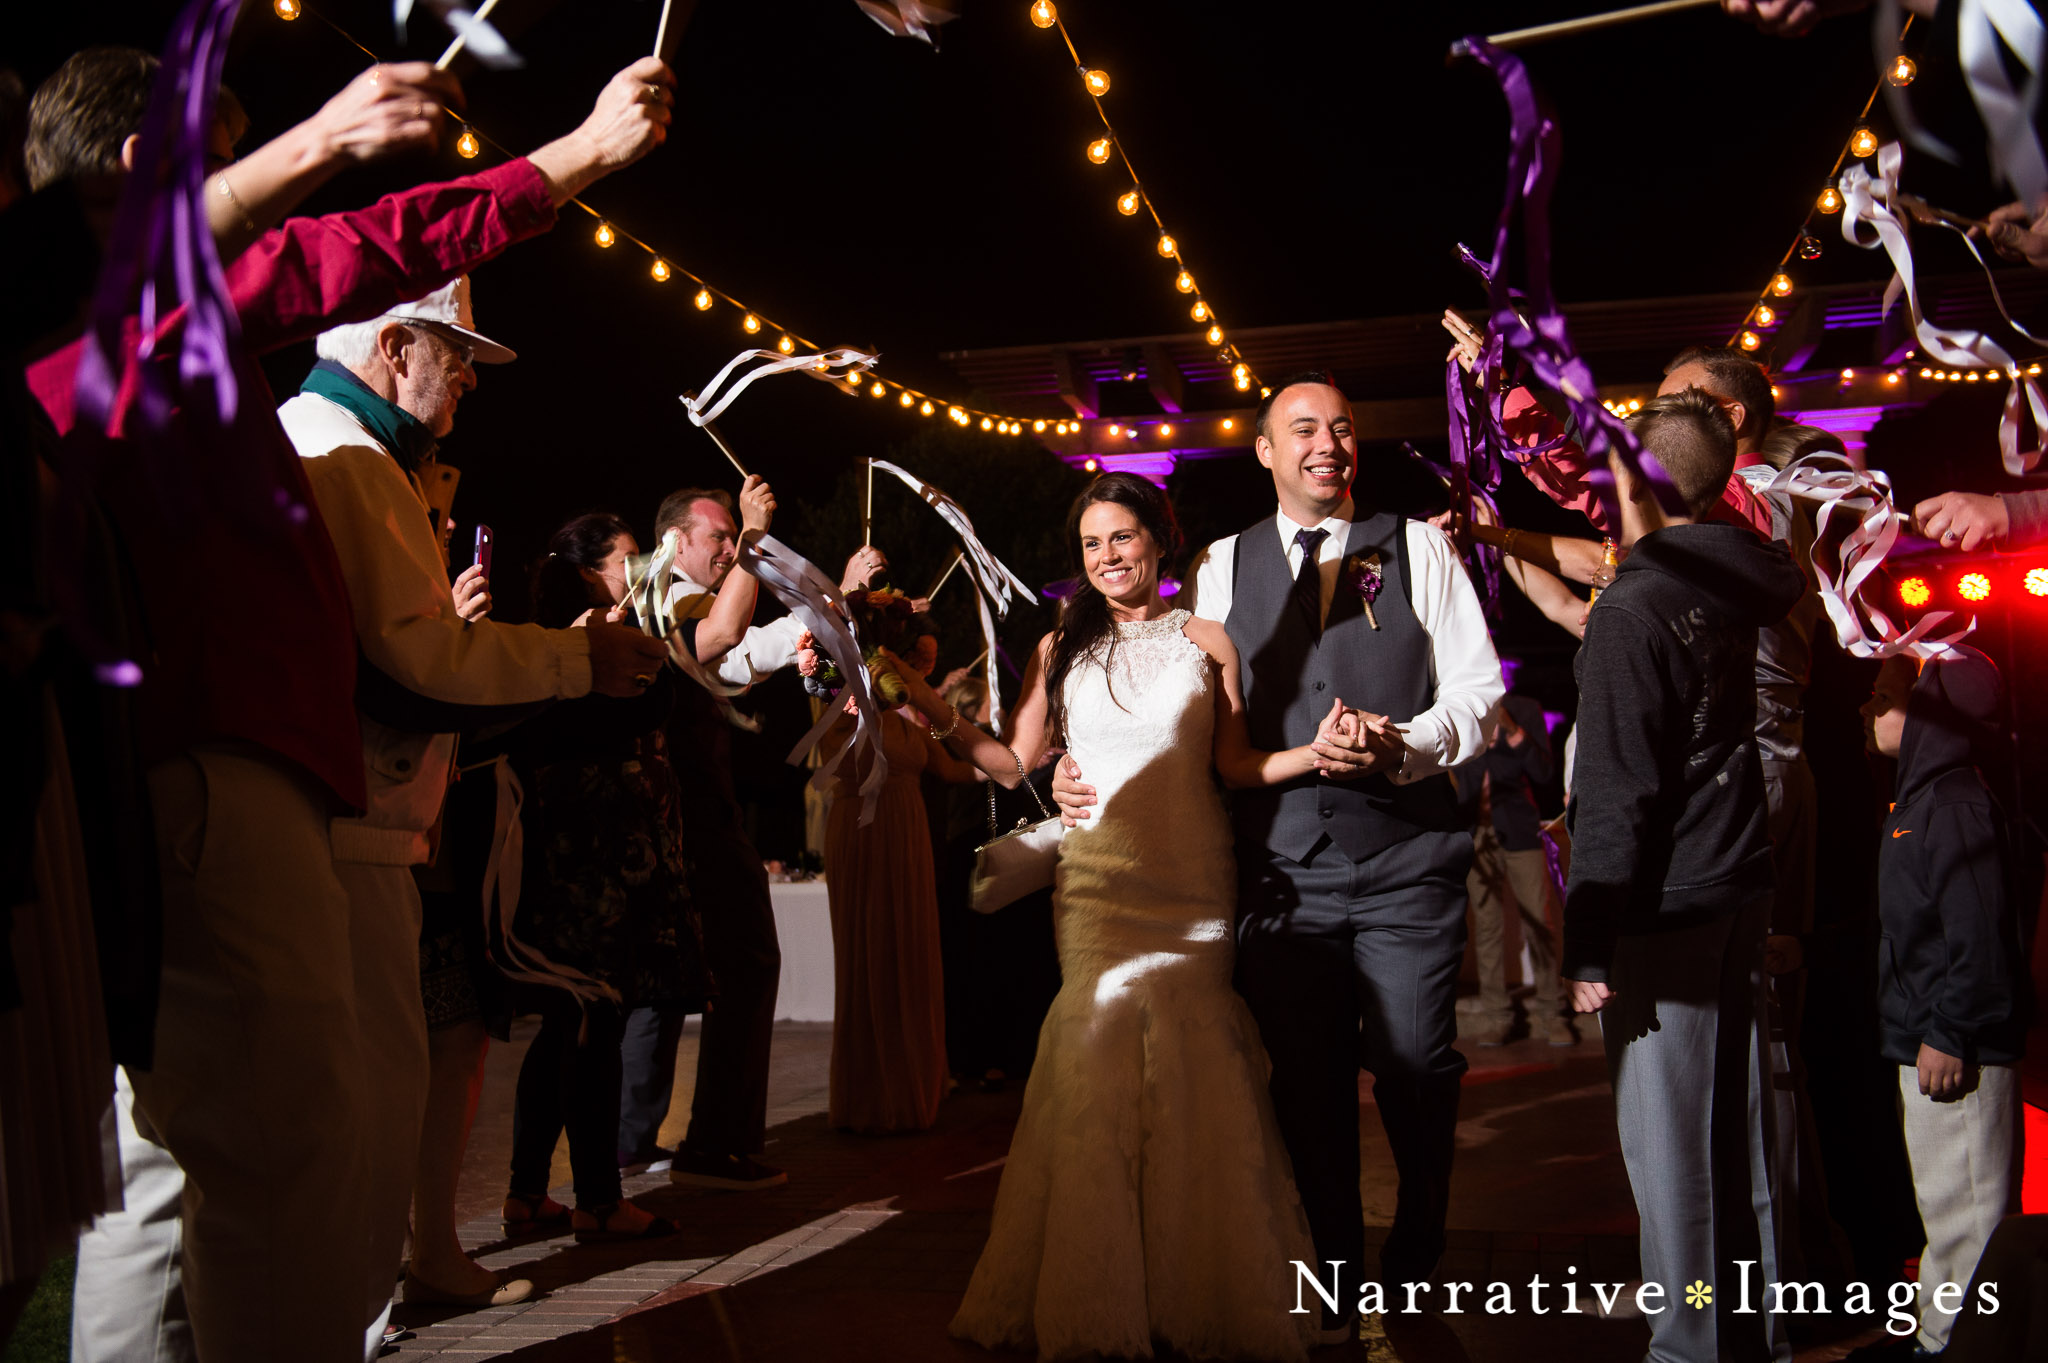 Grand exit of bride and groom after wedding reception at mt palomar winery while guests cheer on married couple